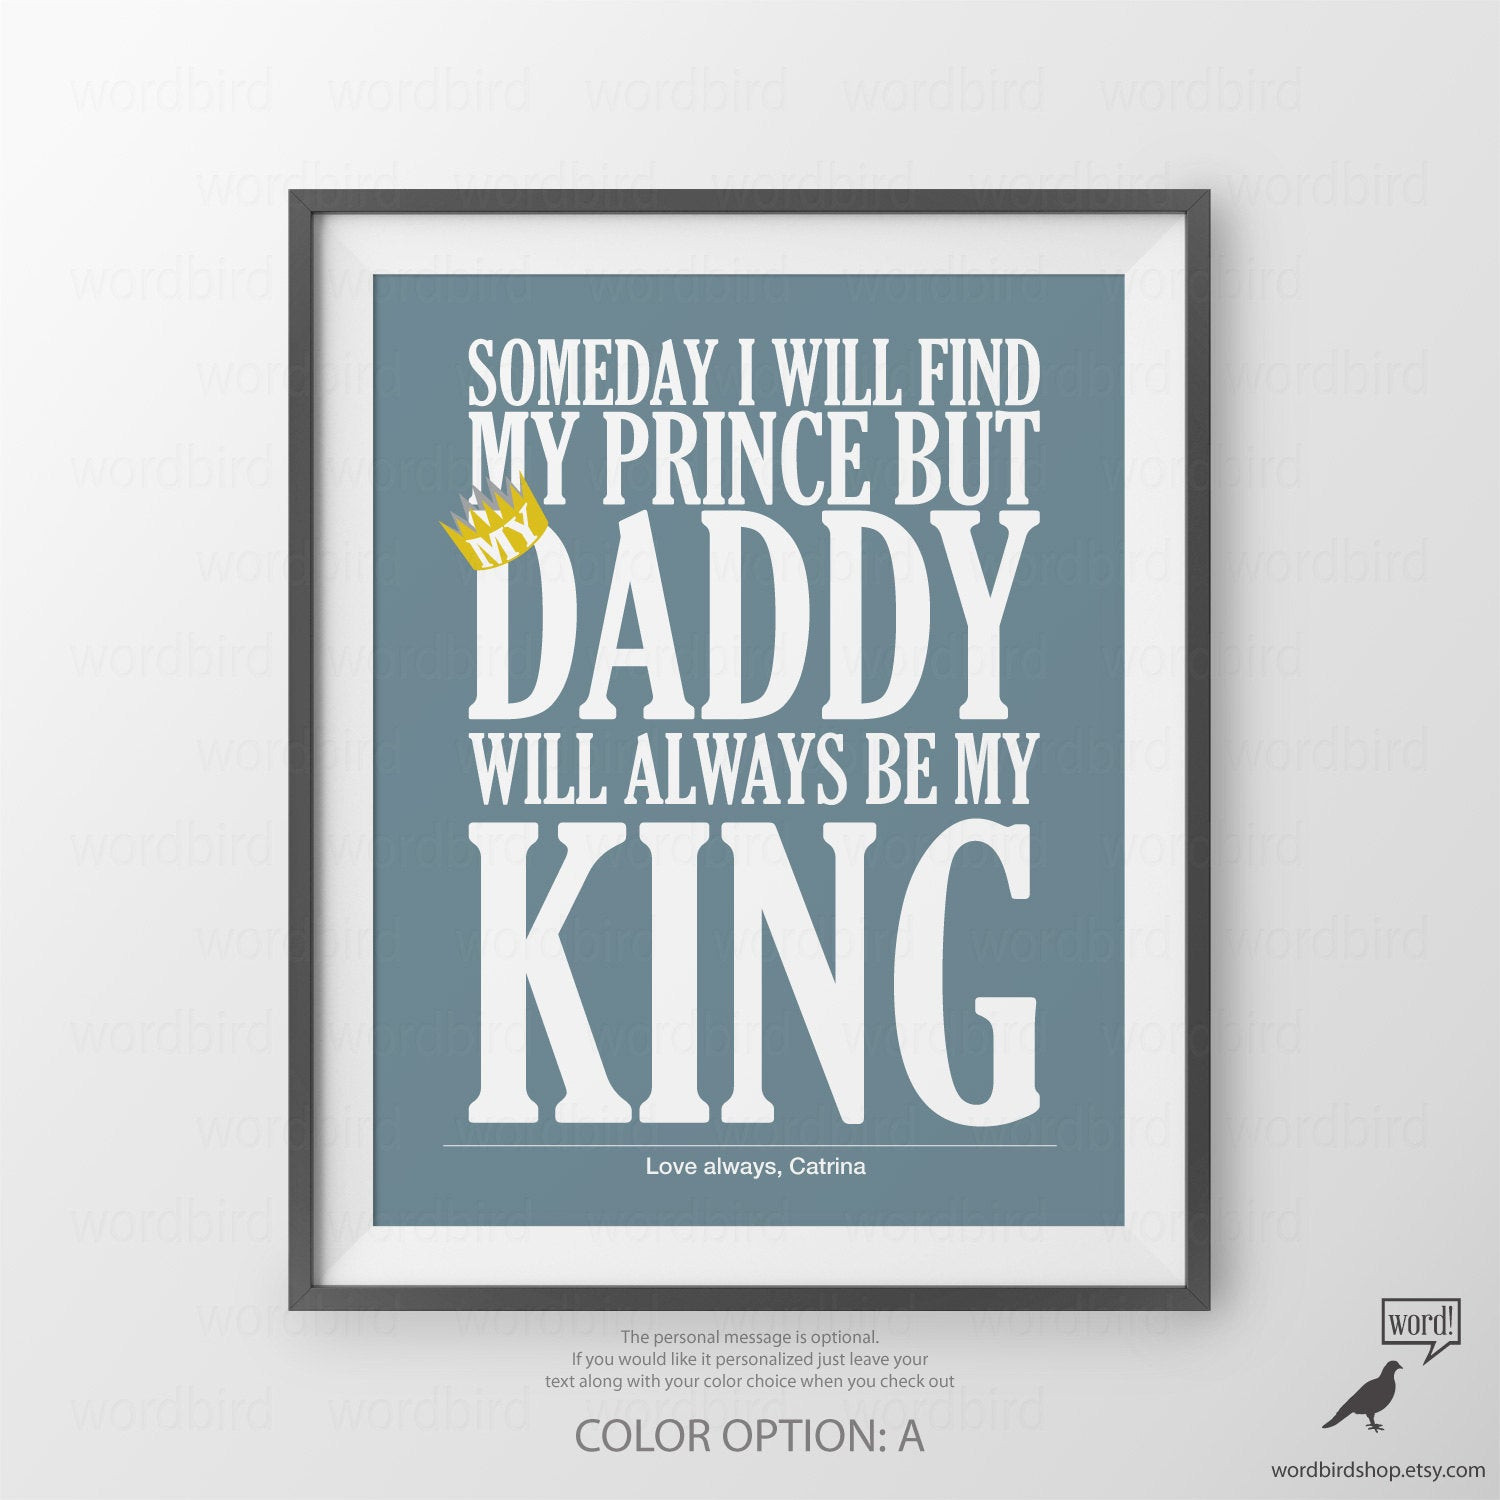 Dad Birthday Gifts From Daughter
 Personalized Christmas Gift for Dad Birthday Gift by